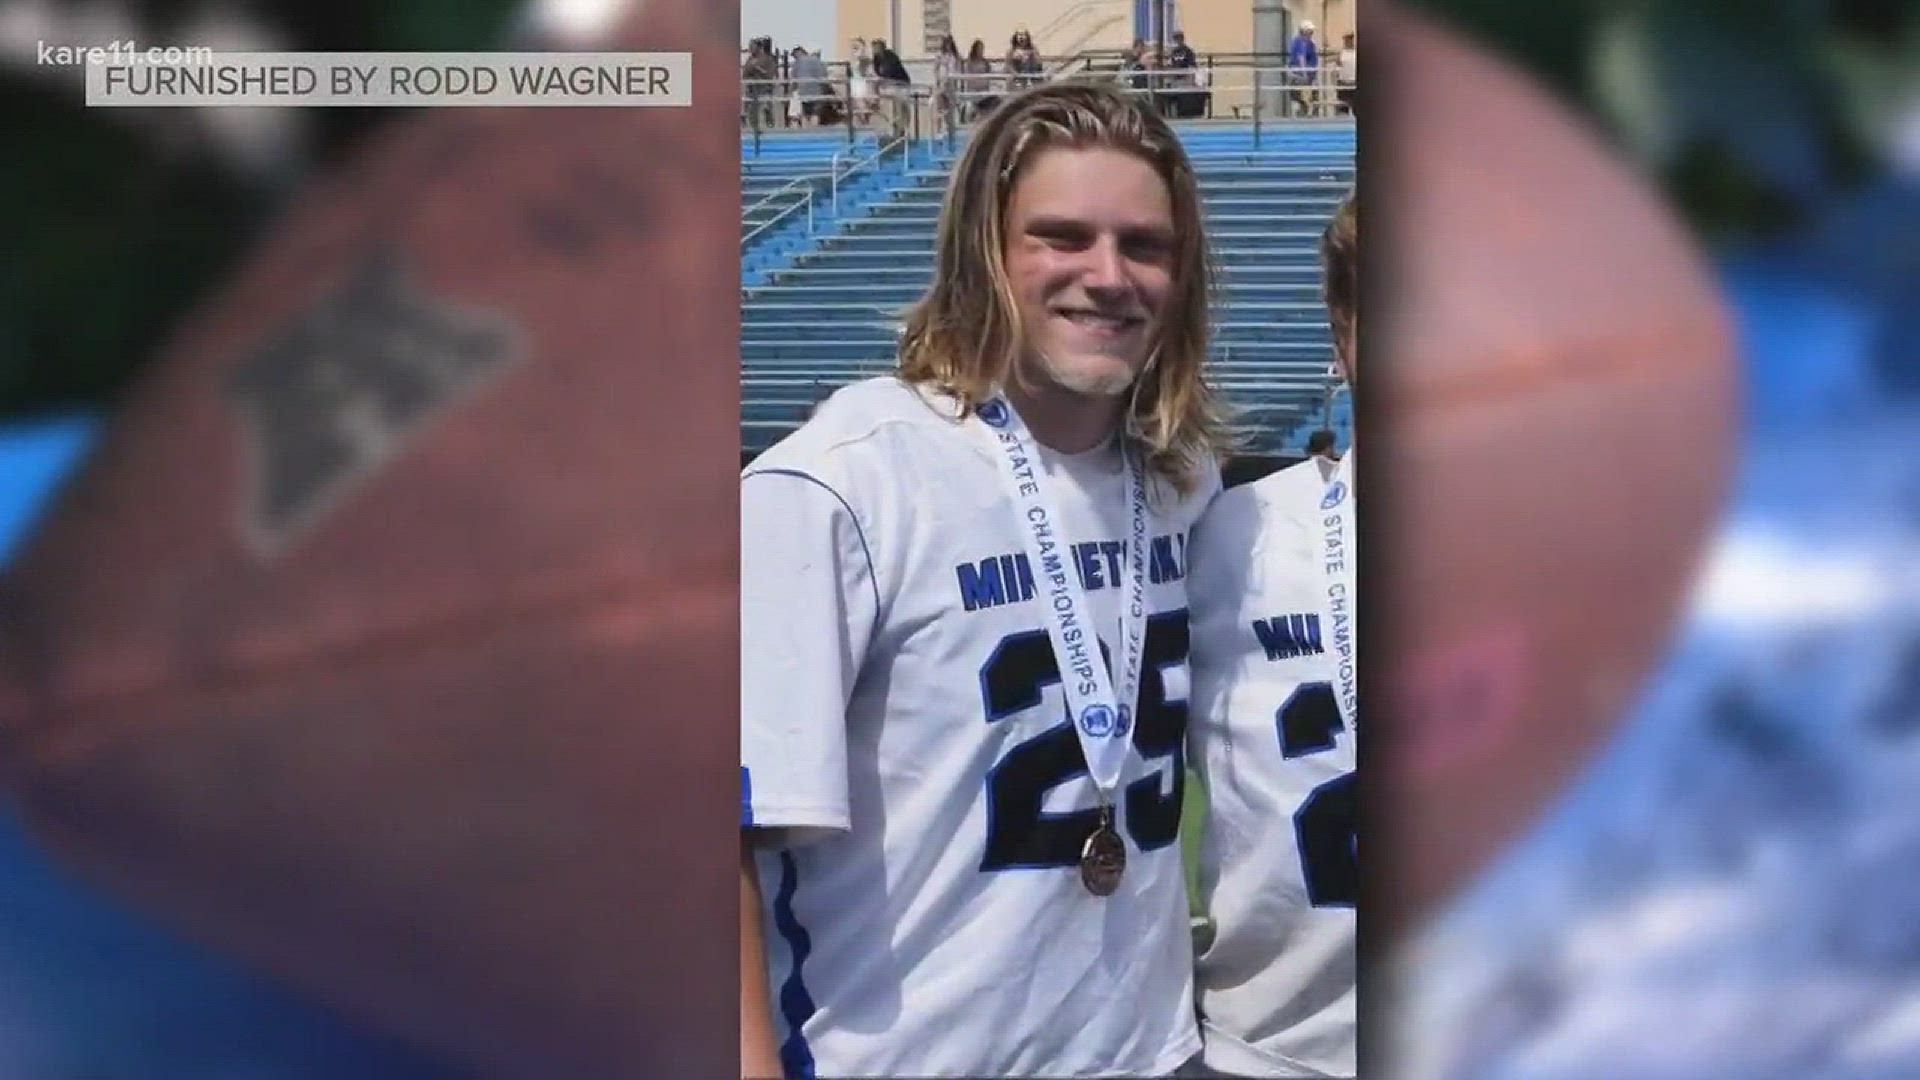 The Minnetonka High School principal identified the victim of Friday's officer-involved shooting as incoming junior Archer Amorosi. Fellow students and faculty members said he was a well-liked, popular student. https://kare11.tv/2NkDX3Y